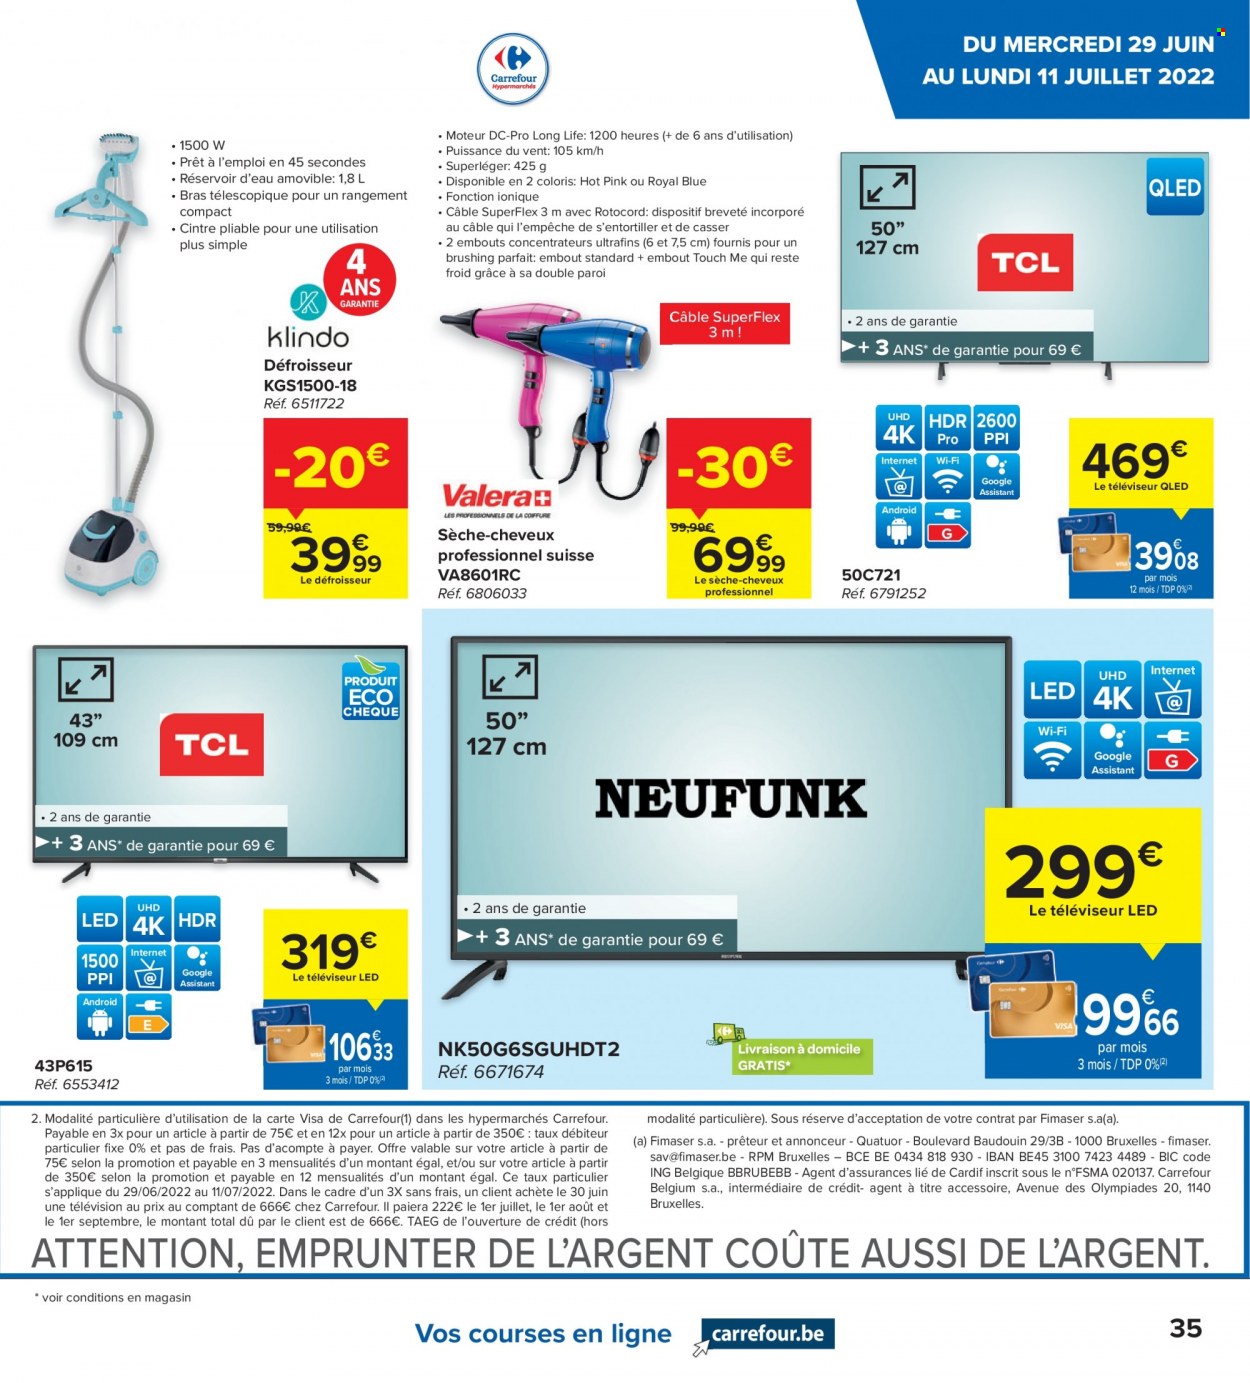 Catalogue Carrefour hypermarkt - 29.6.2022 - 11.7.2022. Page 15.